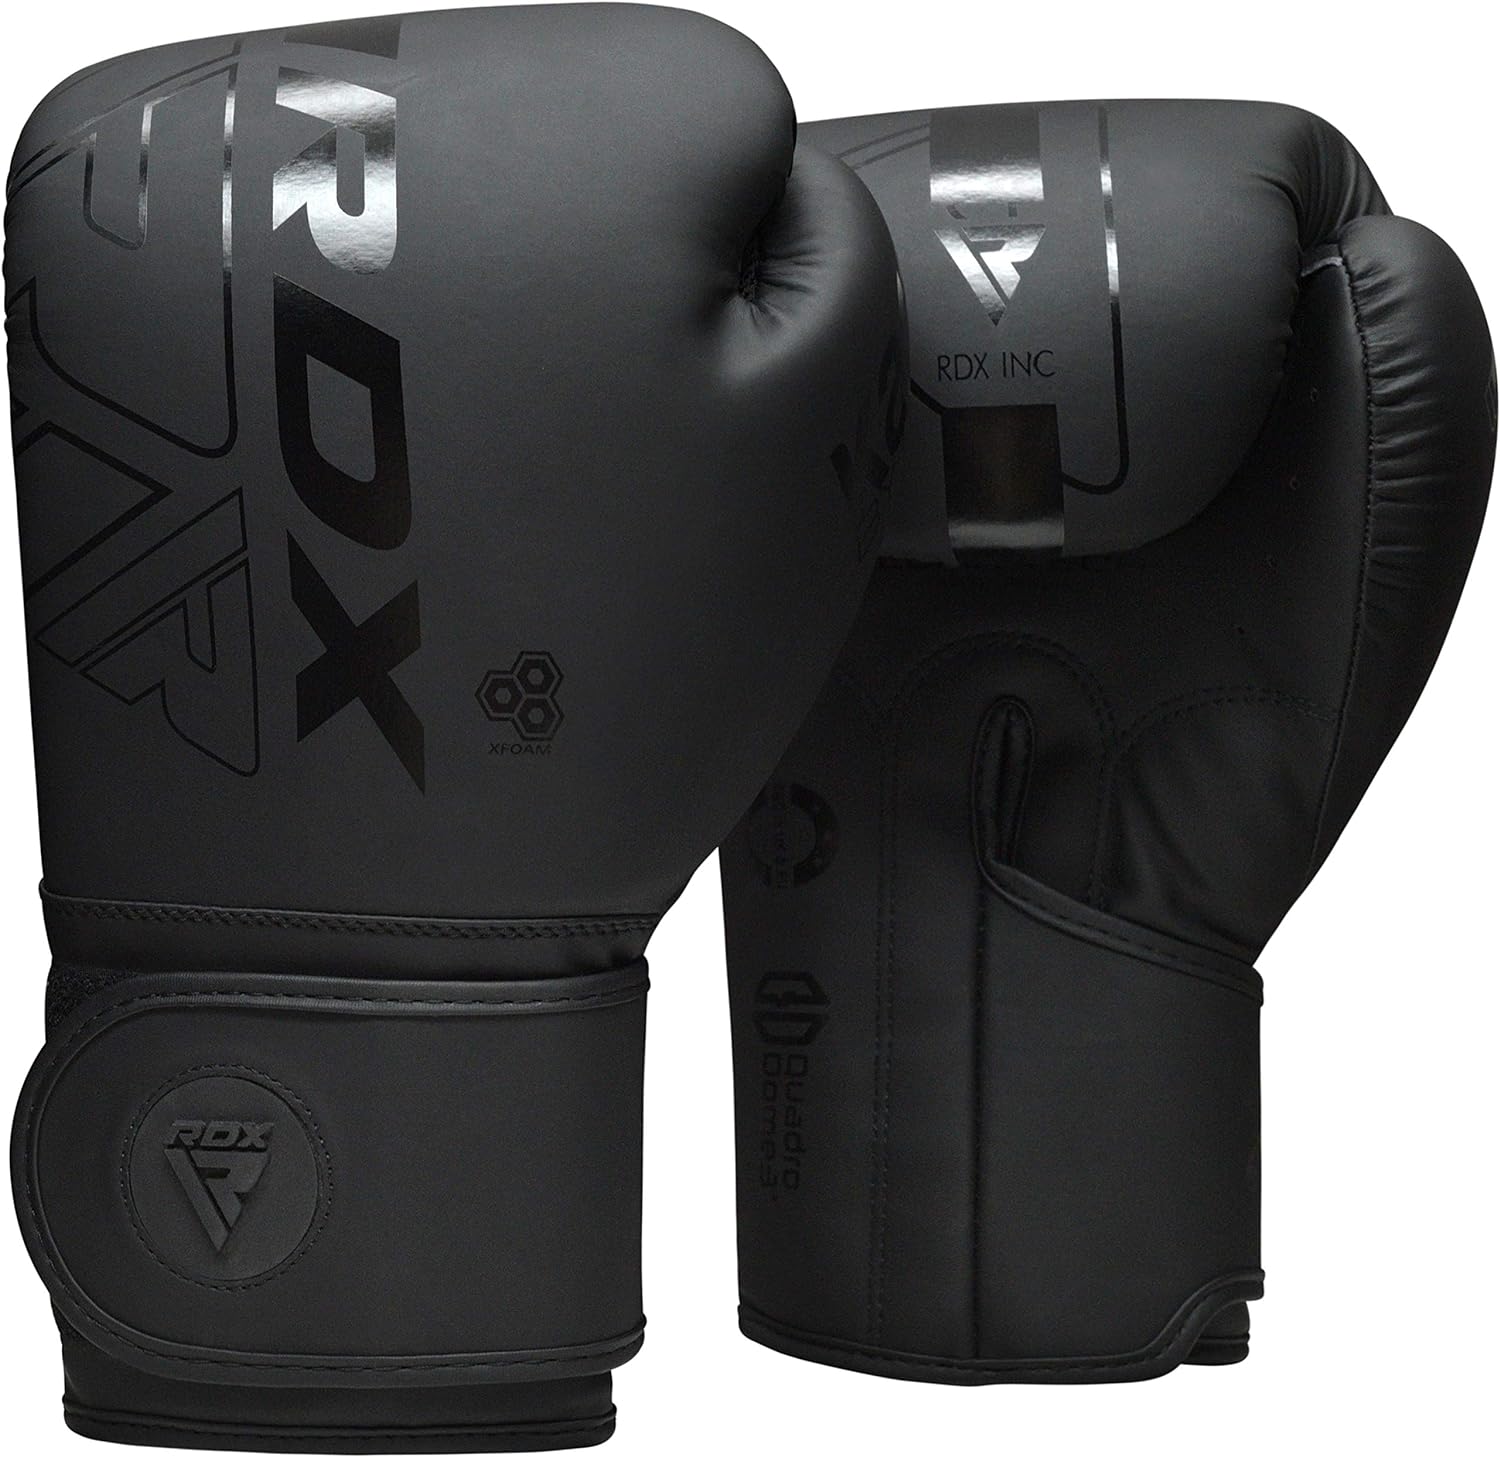 Eclipse Martial Art Supplies Training Gloves BLACK / 16 OZ RDX Boxing Gloves Men Women, Pro Training Sparring, Maya Hide Leather Muay Thai MMA Kickboxing, Adult Heavy Punching Bag Gloves Mitts Focus Pad Workout, Ventilated Palm